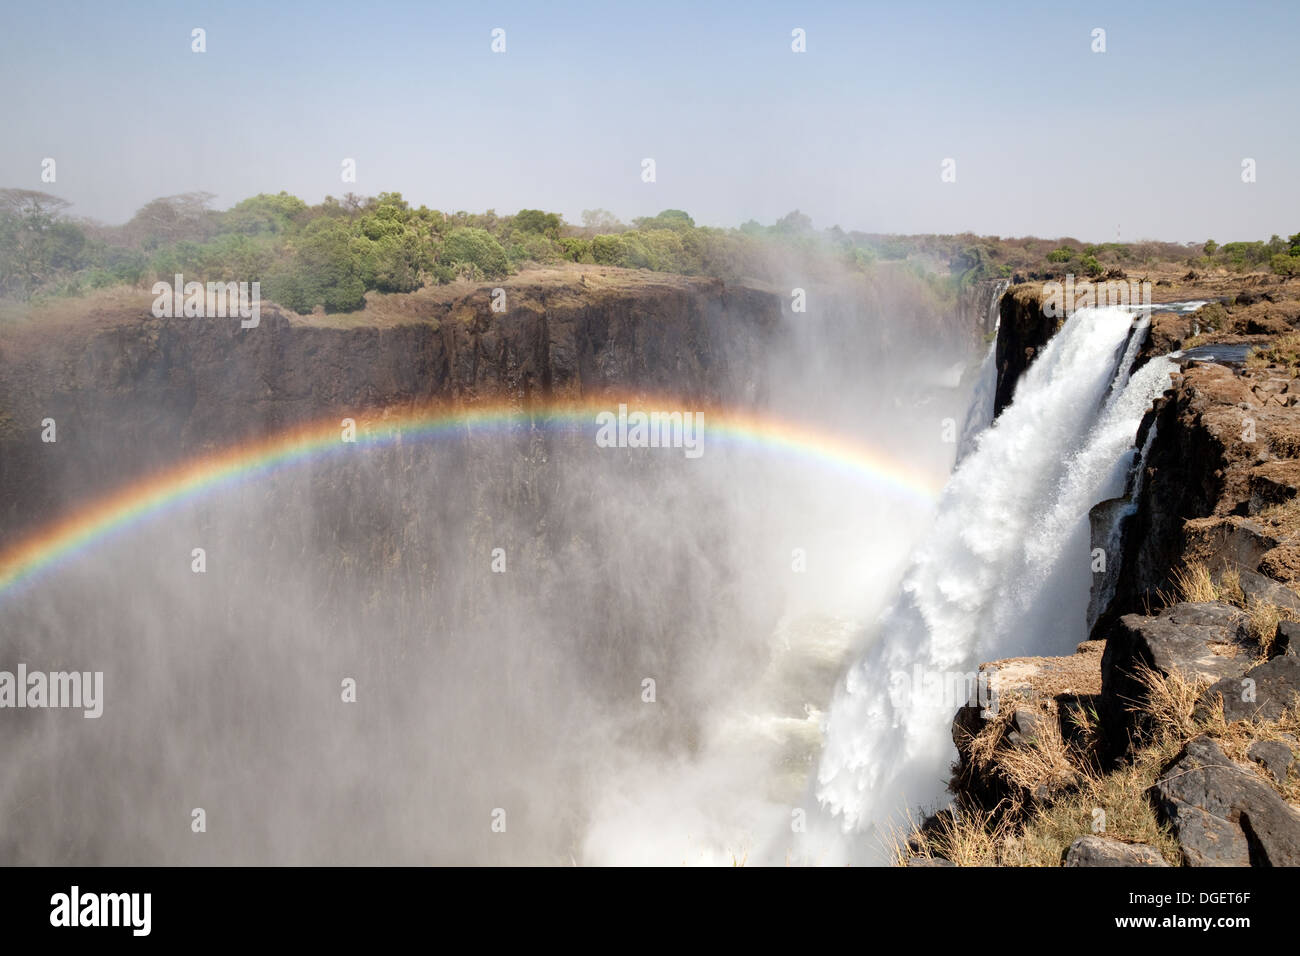 Victoria Falls, Zambia with rainbow, seen from Livingstone Island on the Zambia side, Africa Stock Photo